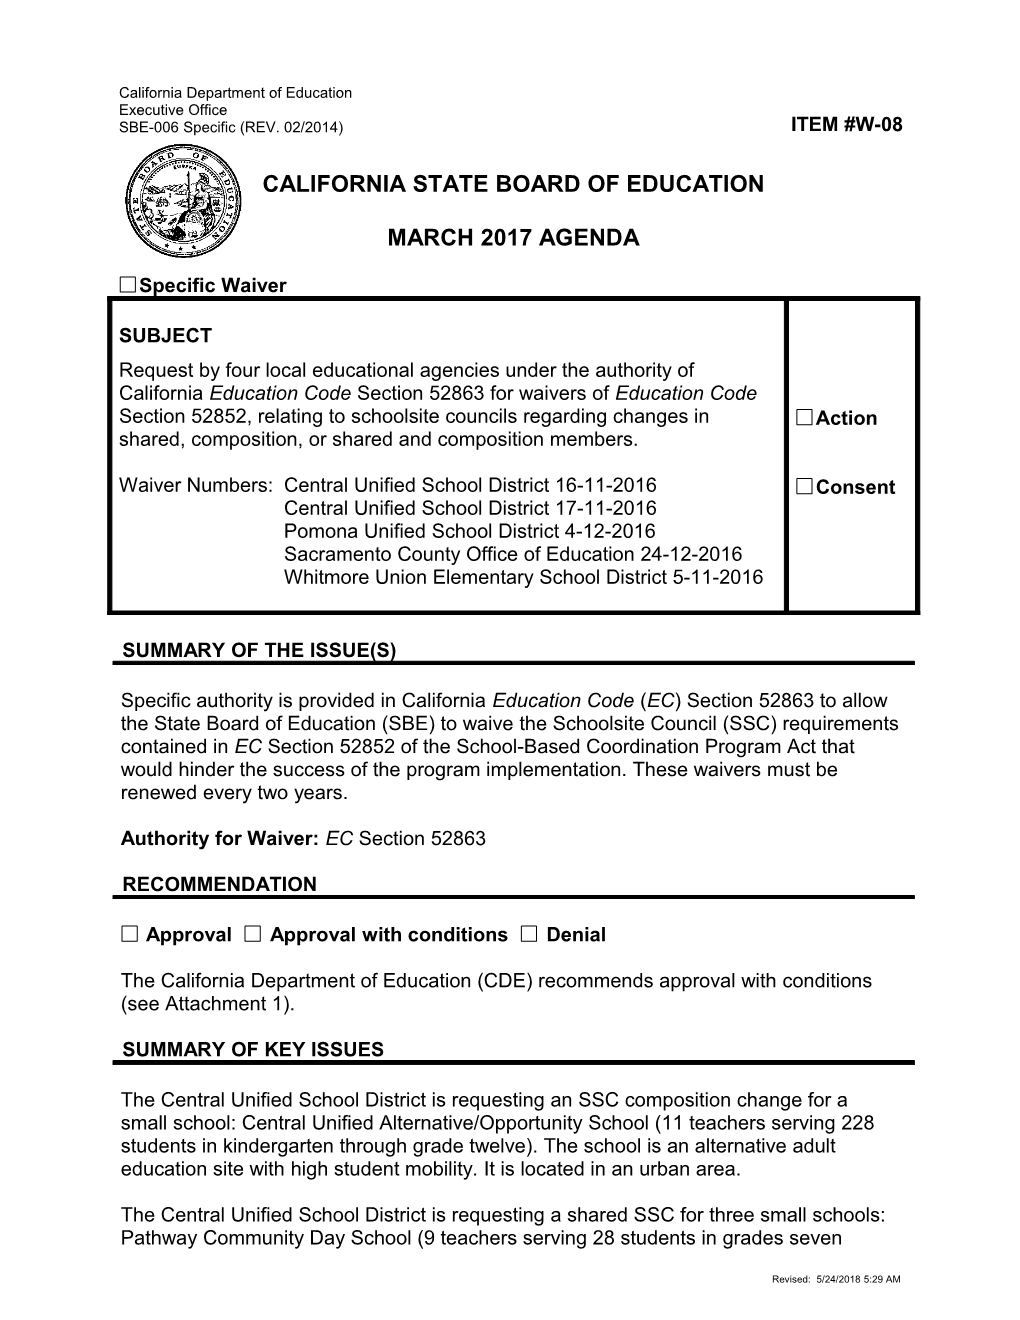 March 2017 Waiver Item W-08 - Meeting Agendas (CA State Board of Education)